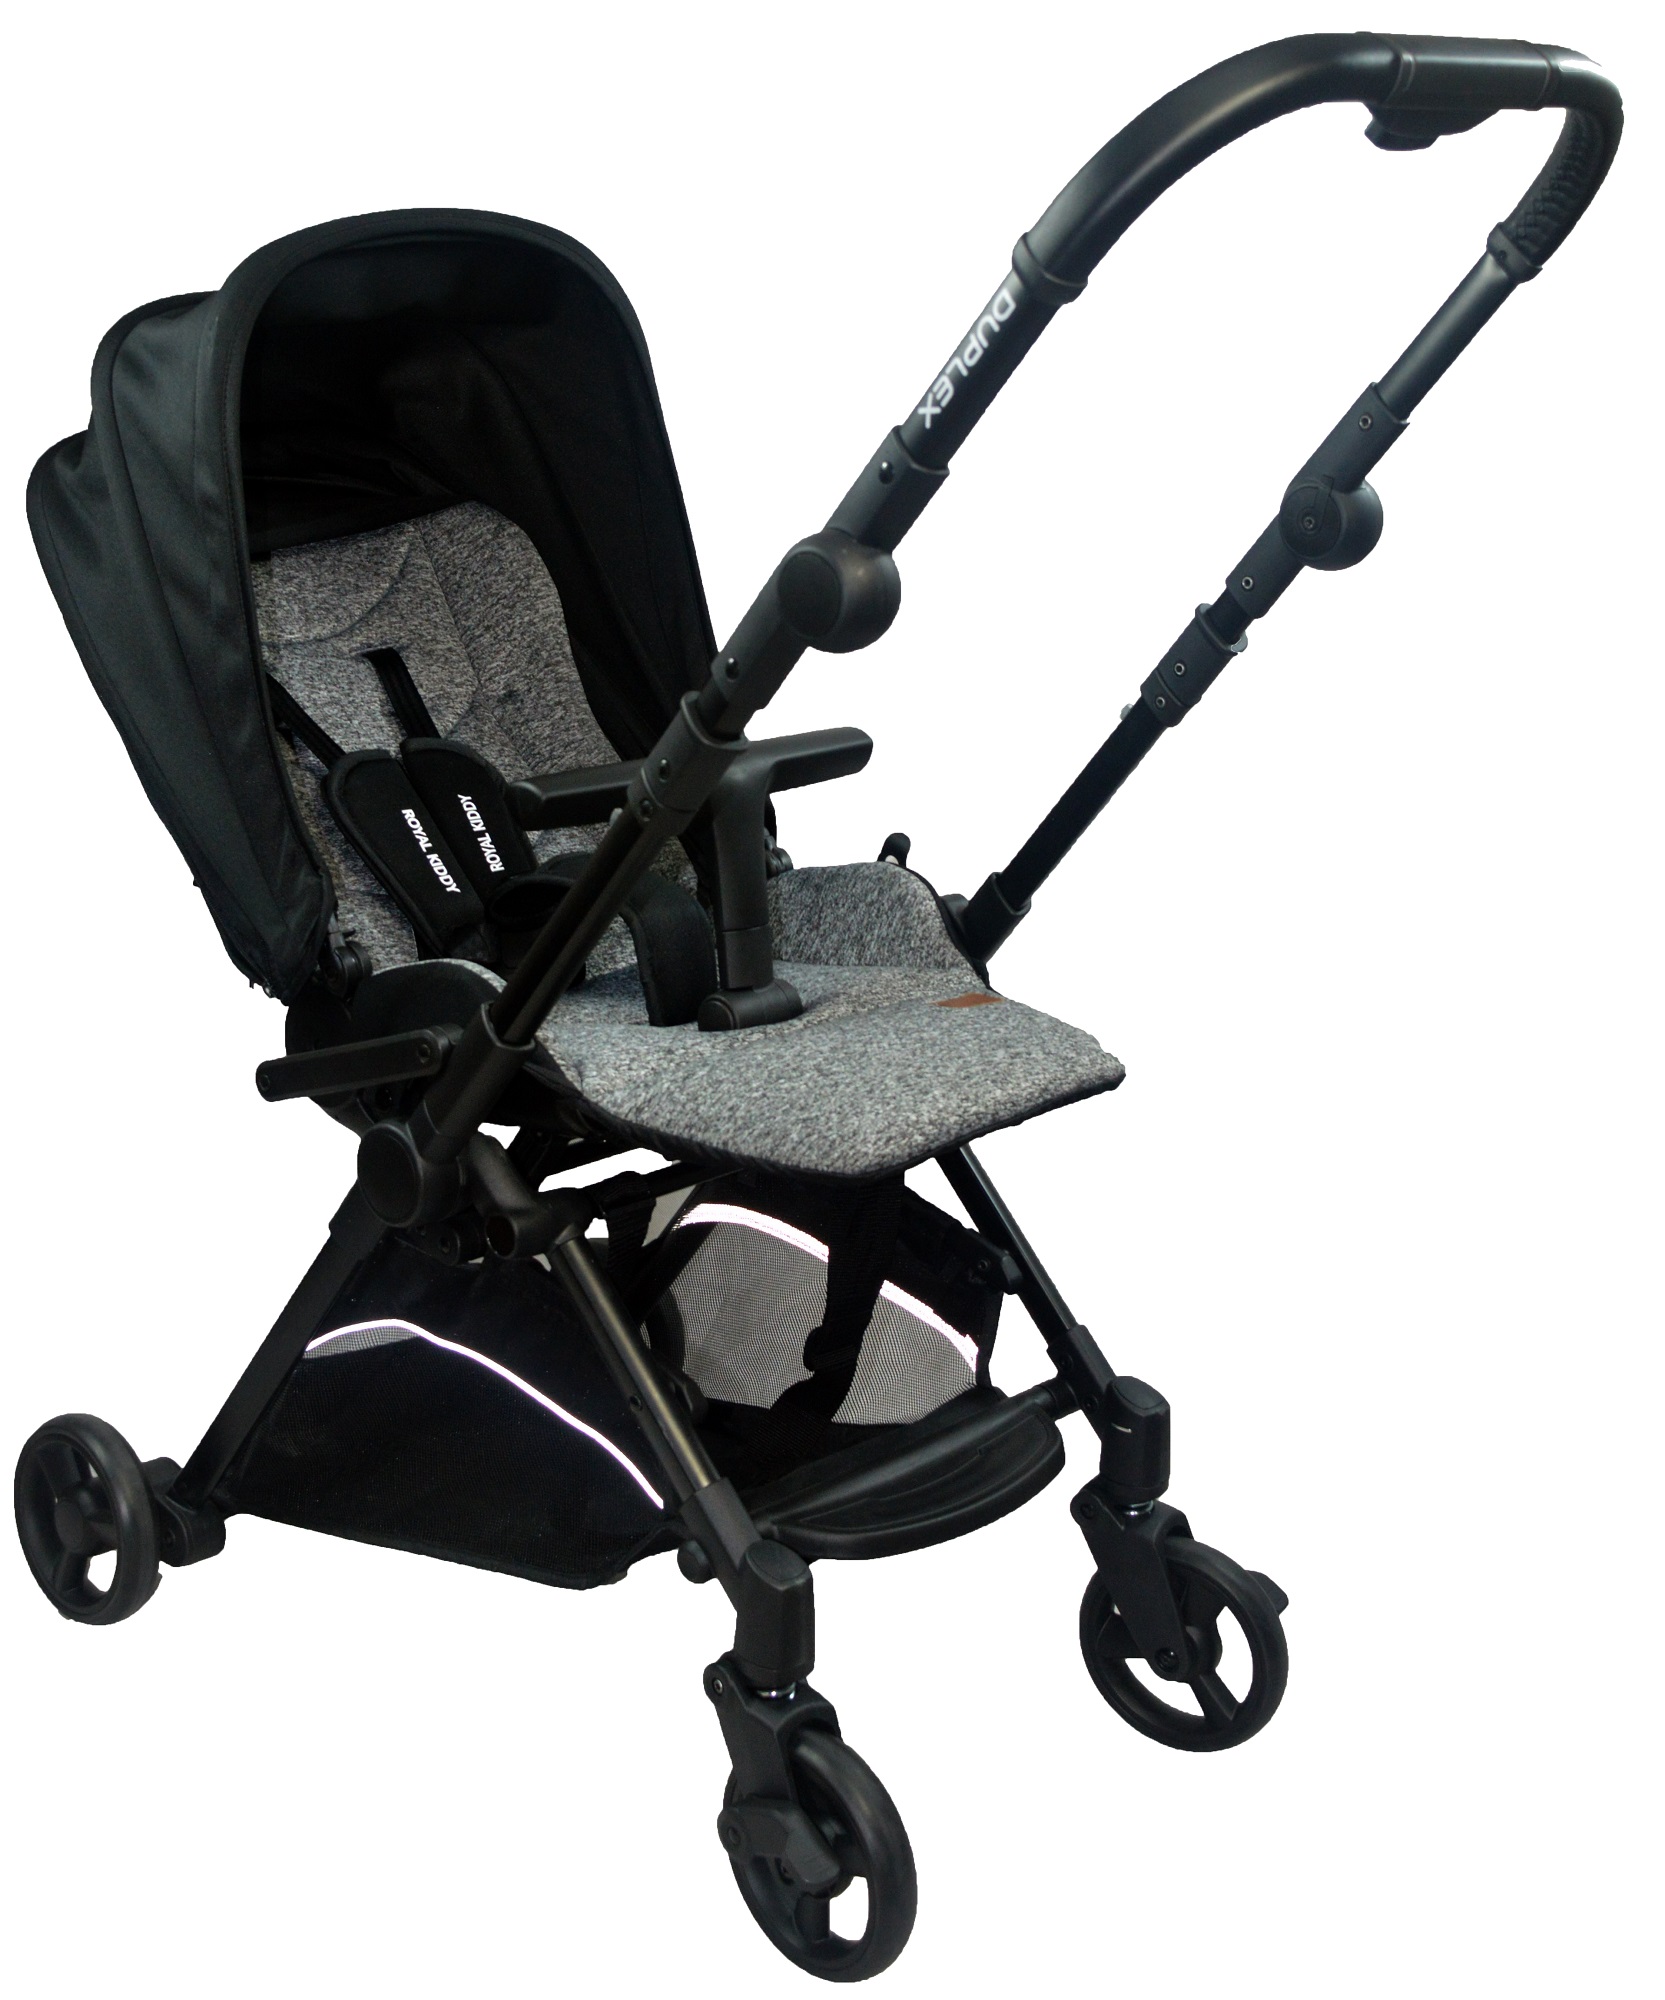 Royal Kiddy London Duplex Compact Double Facing Stroller Grey with FREE Travelling Bag, Mosquito Net and Rain Cover